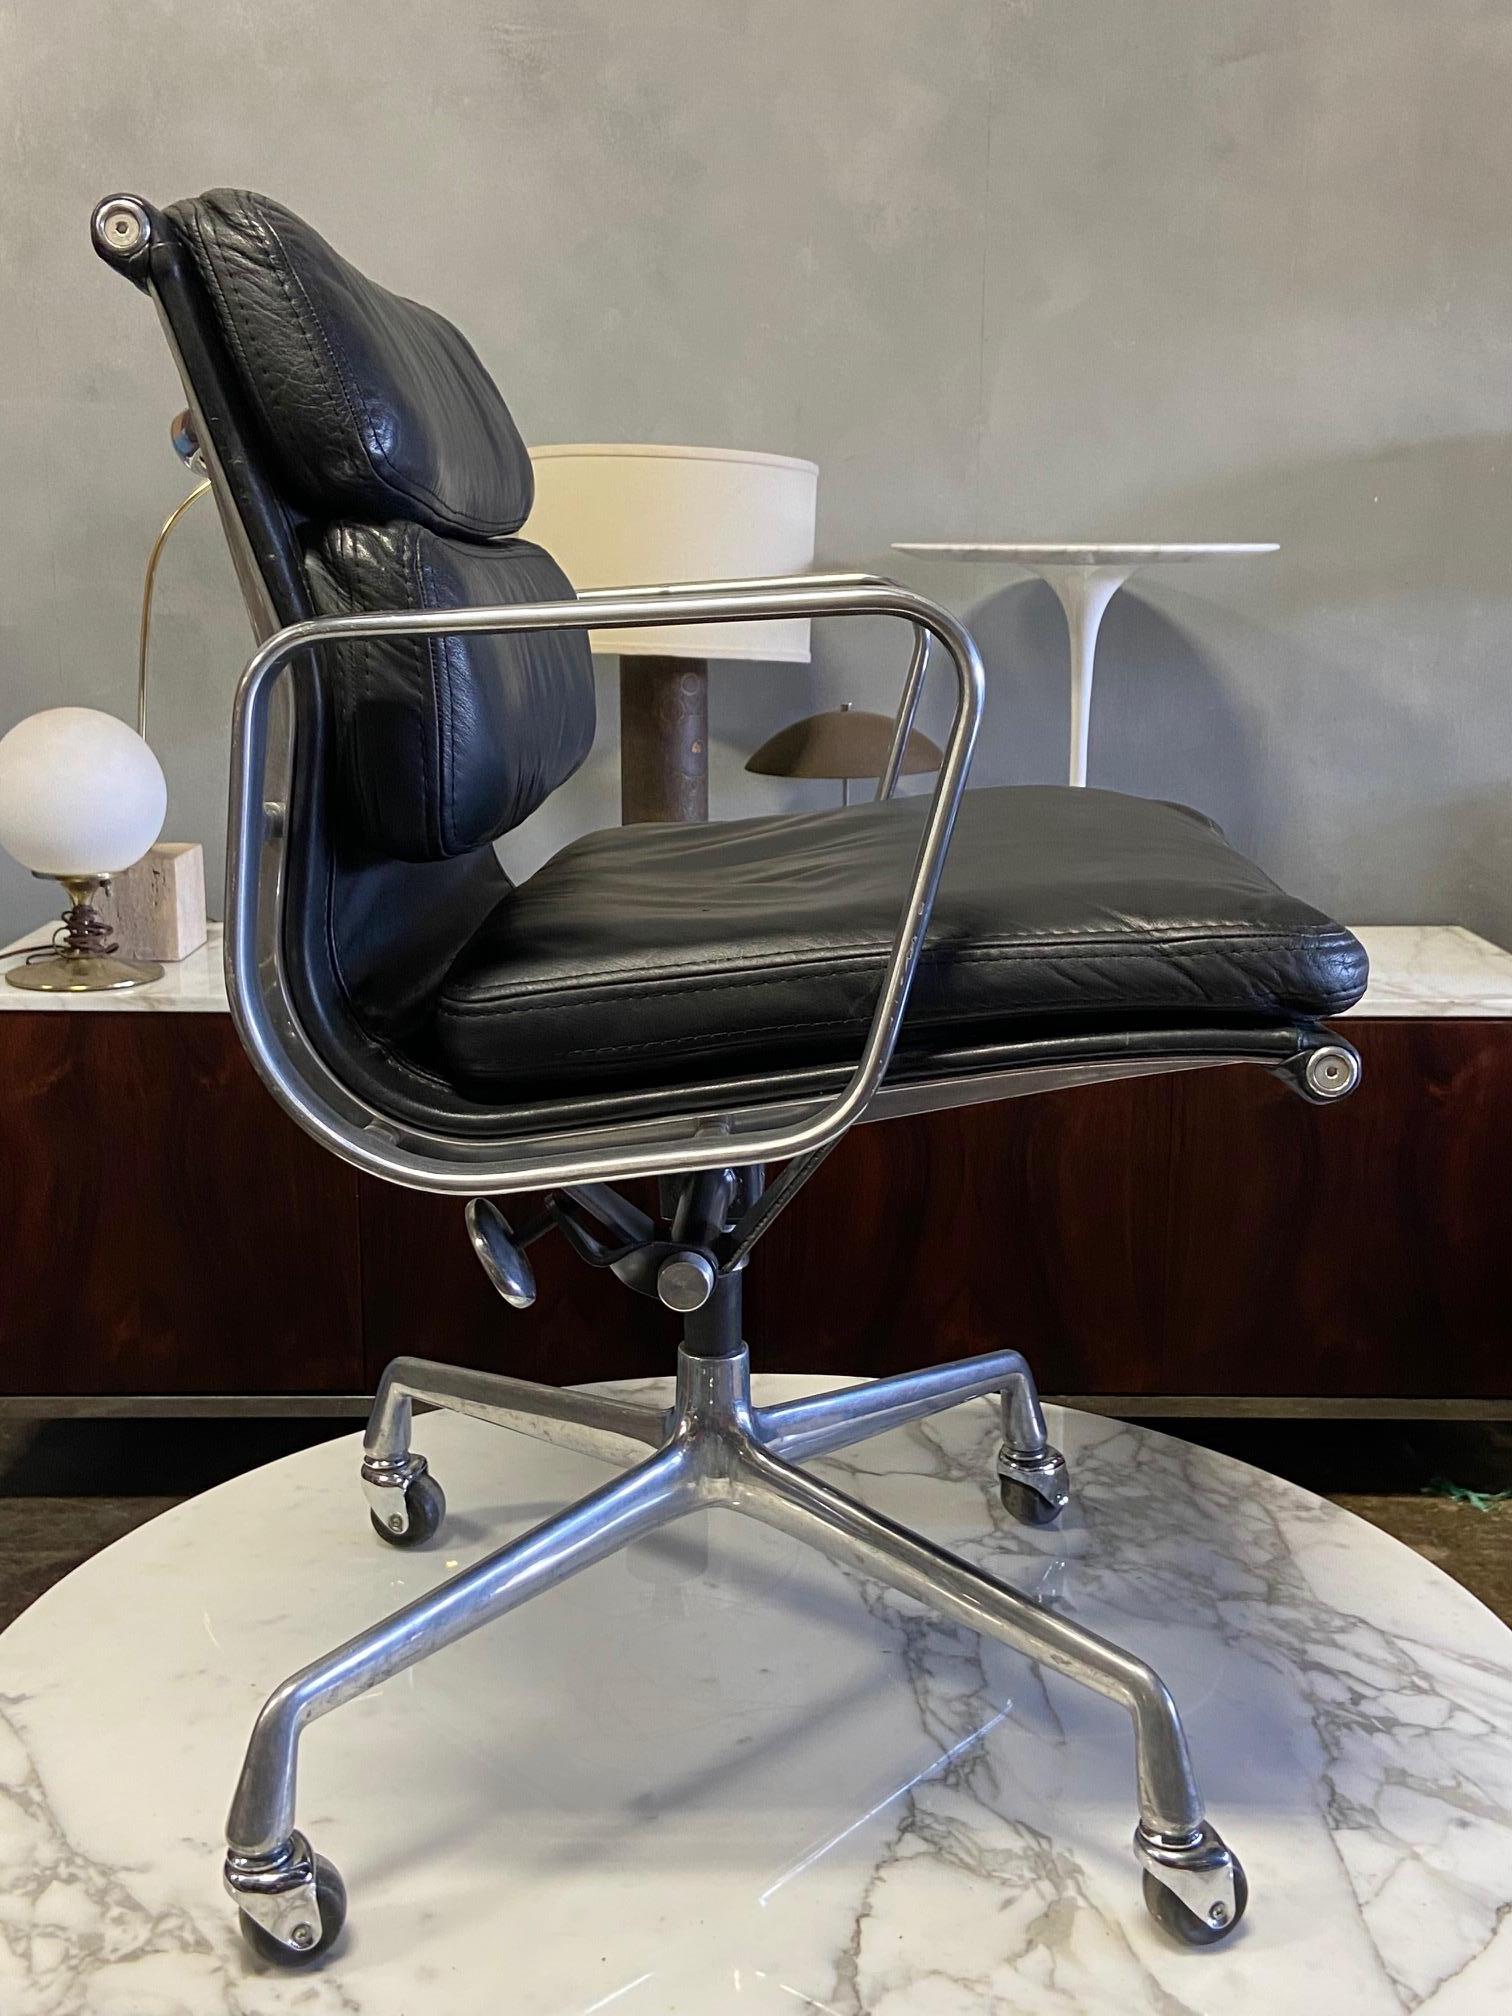 For your consideration is this authentic Eames for Herman Miller vintage soft pad chairs in brown leather. Adjustable tilt and height adjustment. This authentic vintage example is an icon of Mid-Century Modern design. This chair is part of the Eames